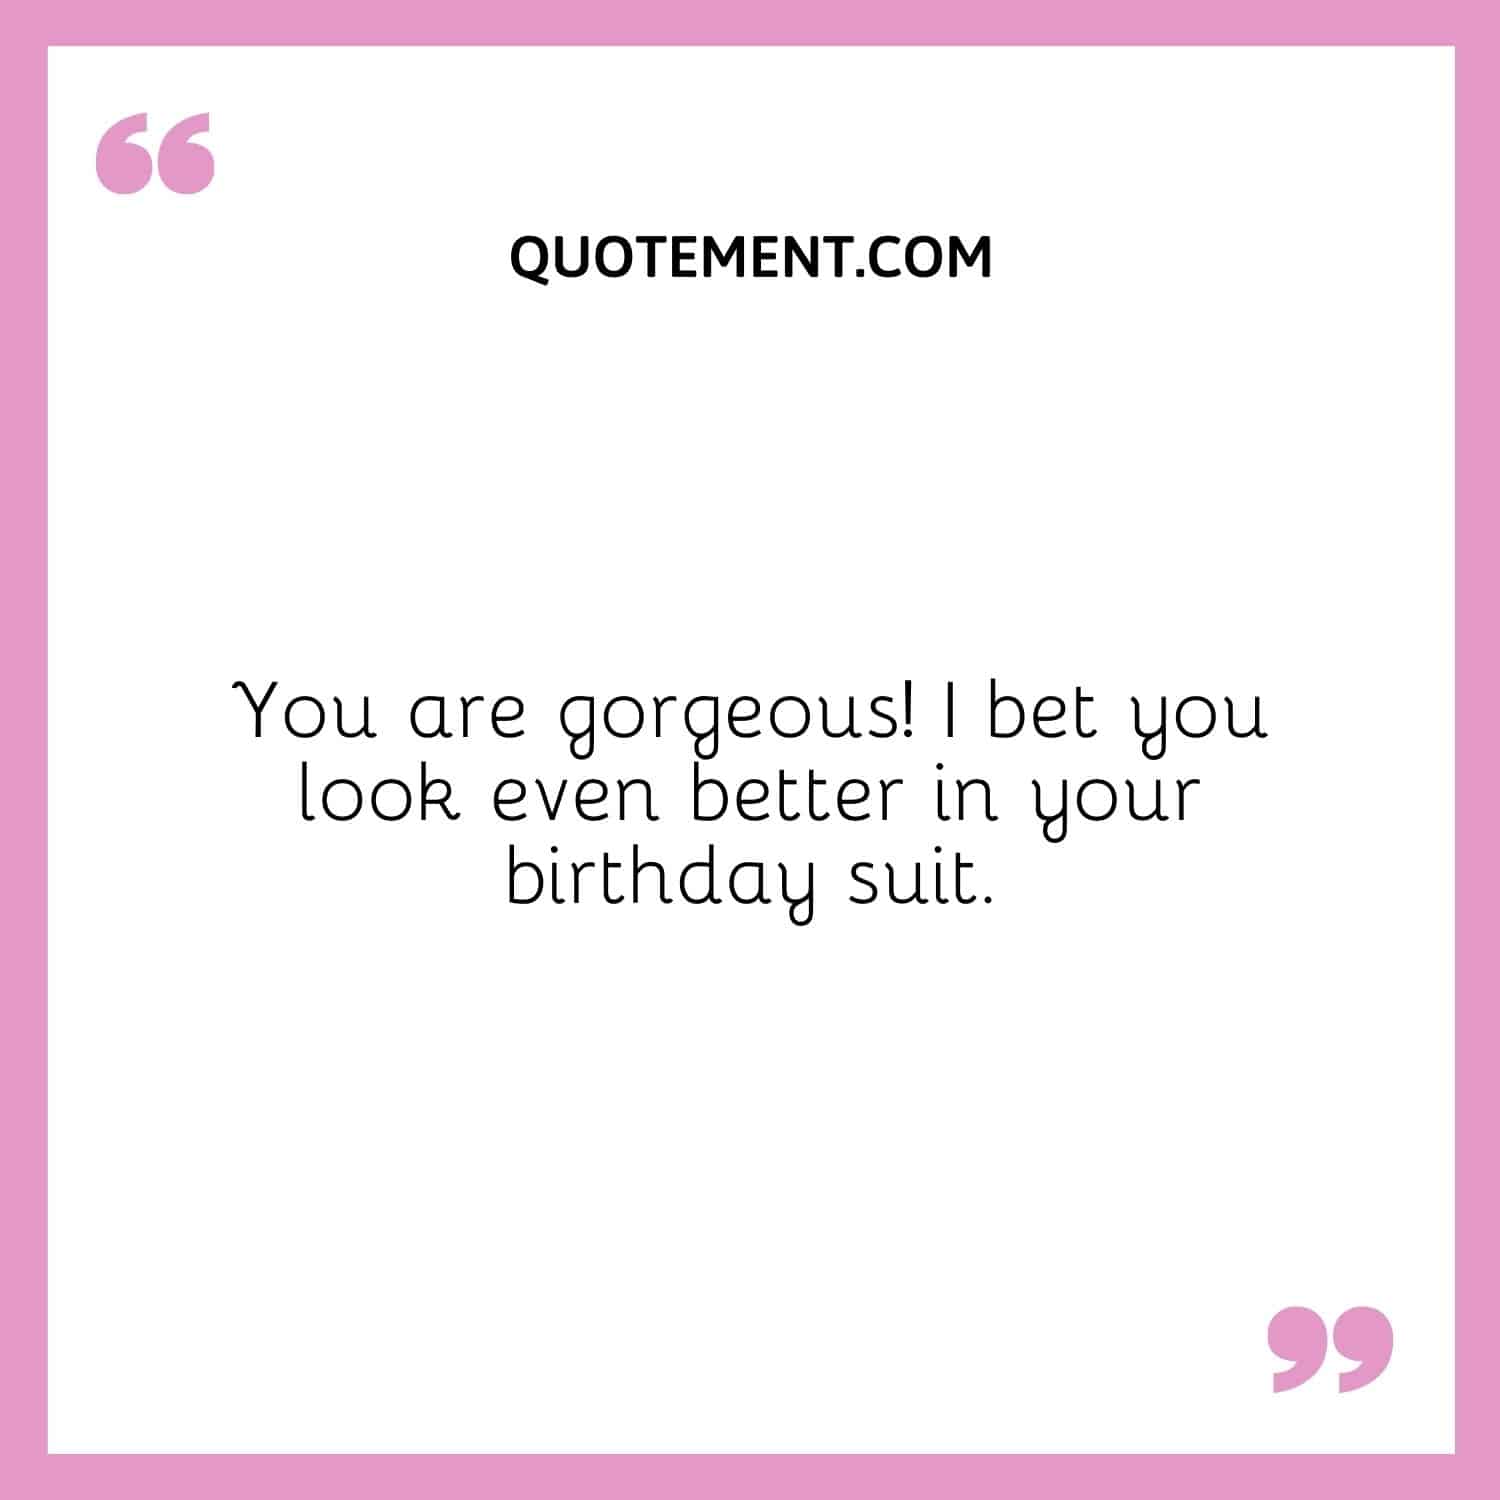 You are gorgeous! I bet you look even better in your birthday suit